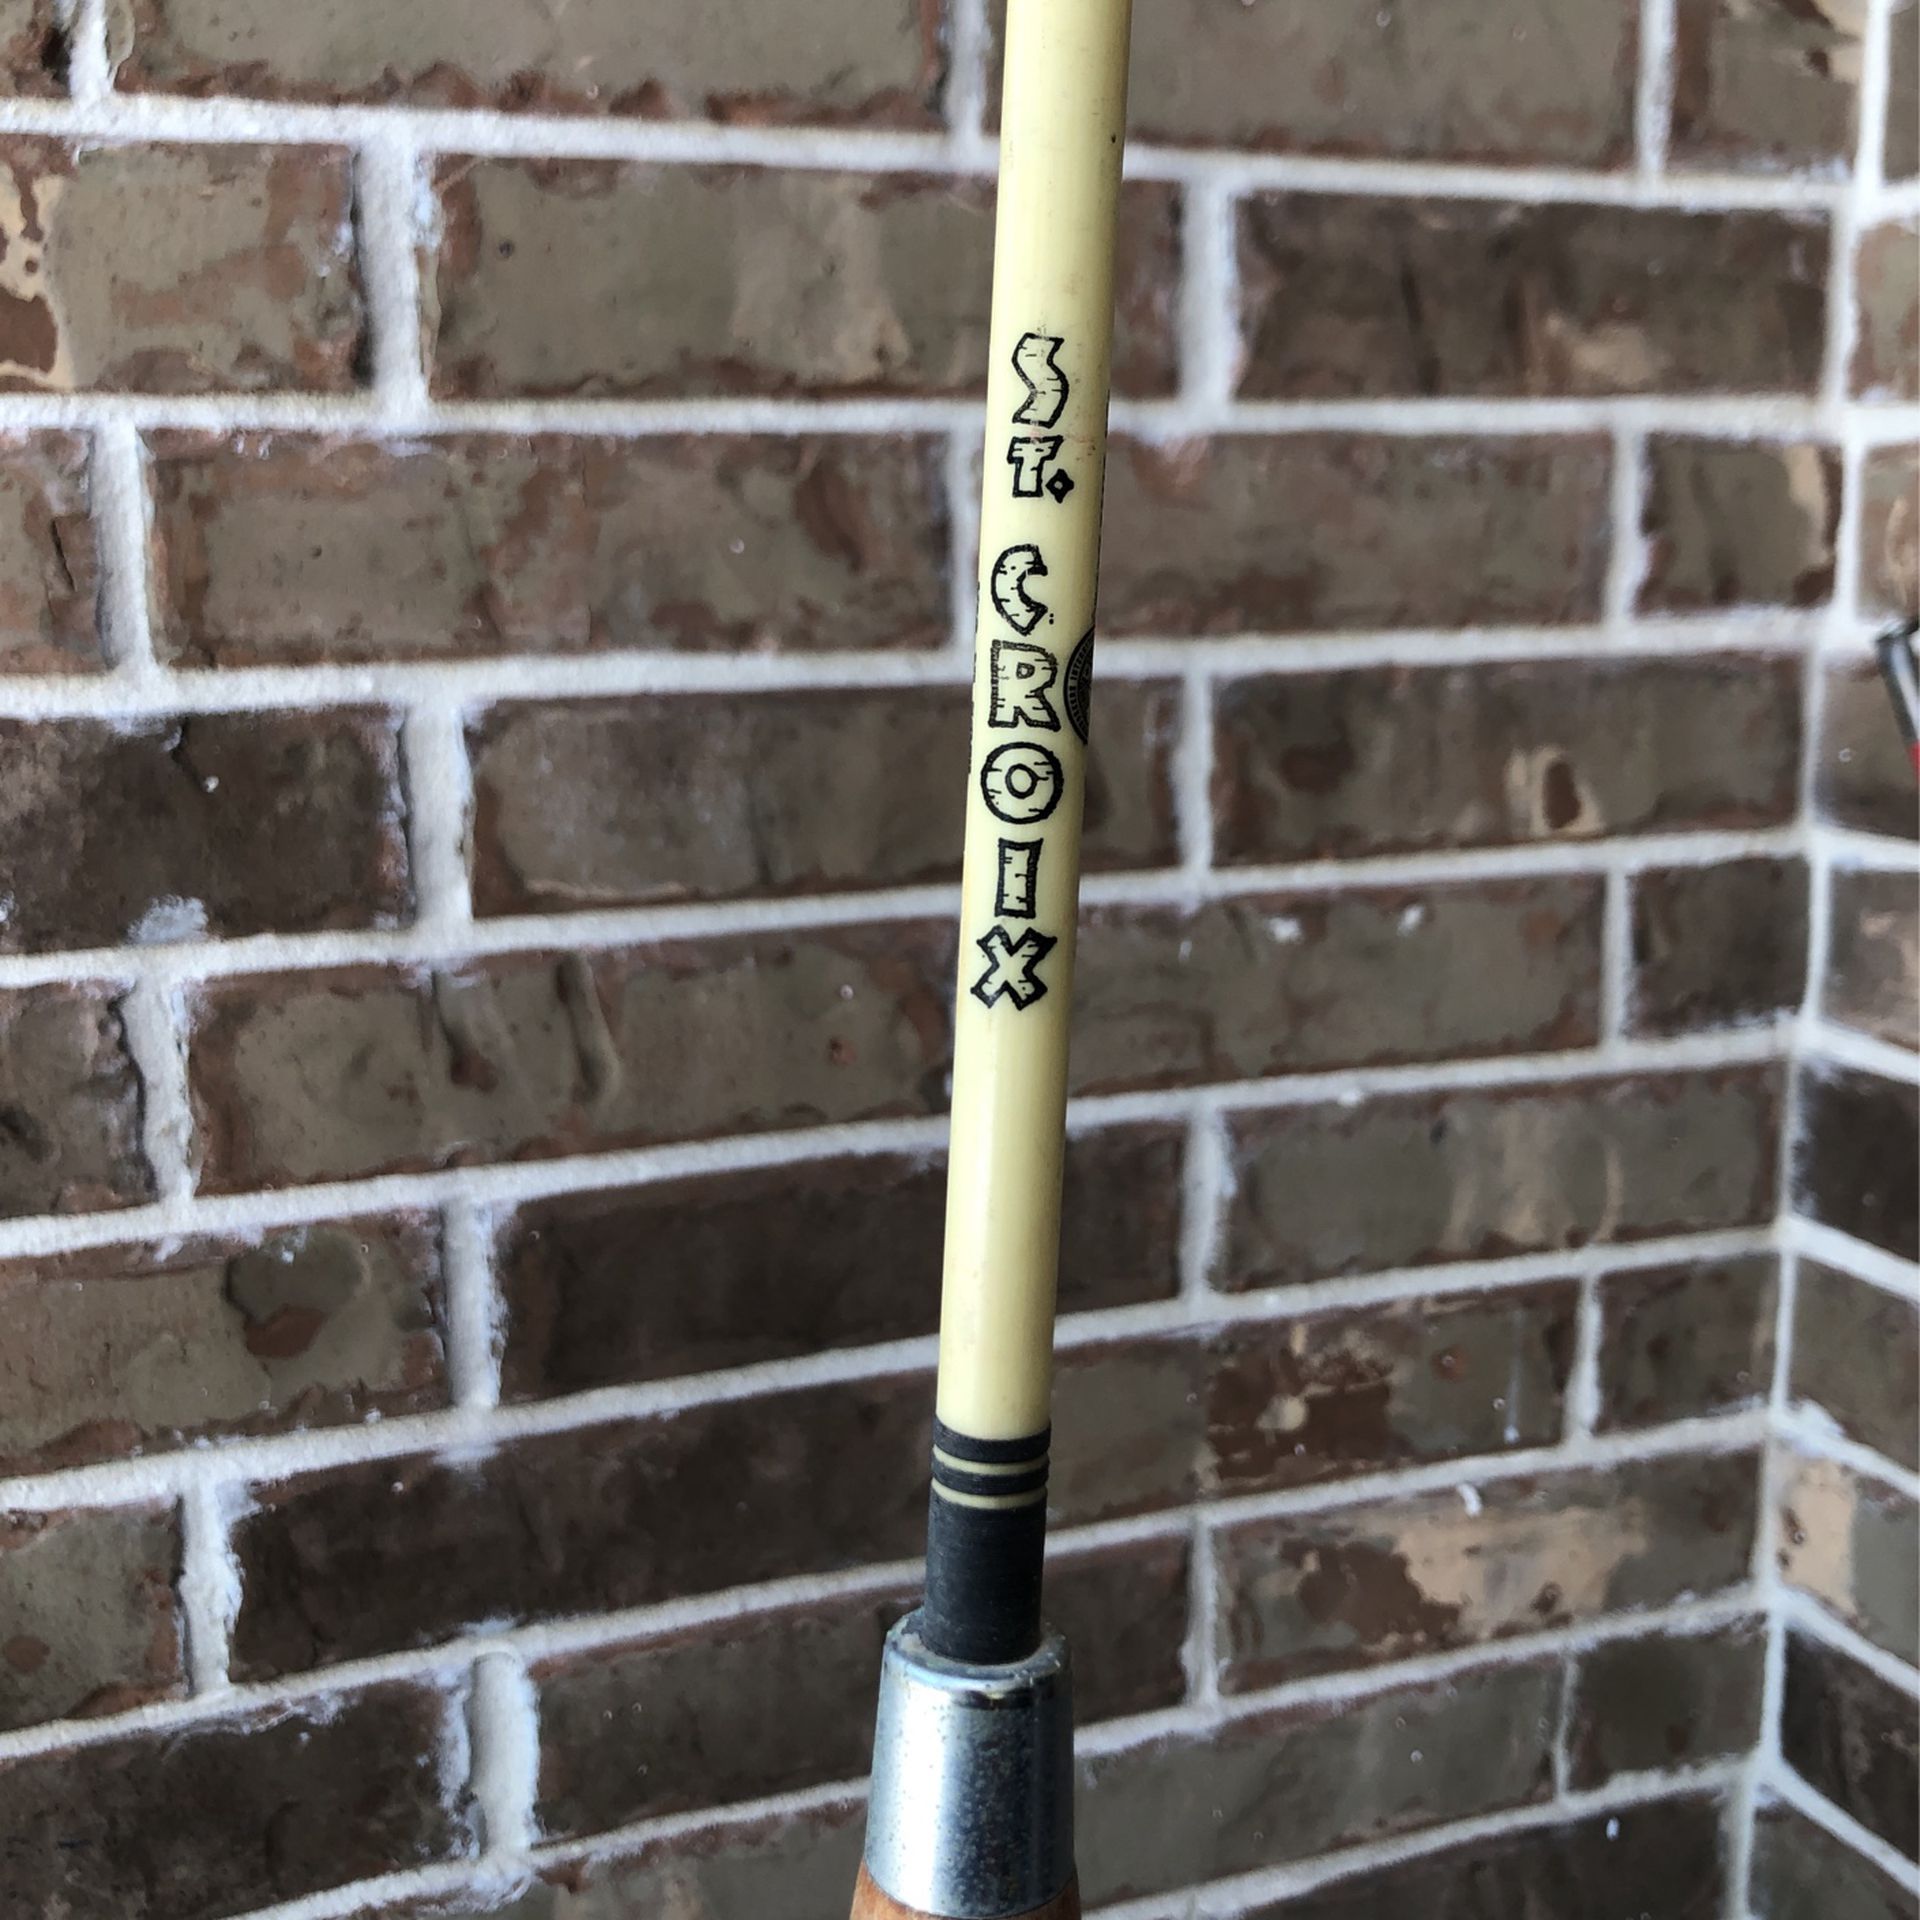 Vintage St. Croix Fiberglass Fishing Pole with Wooden Handle 6 1/2 Long for  Sale in San Antonio, TX - OfferUp